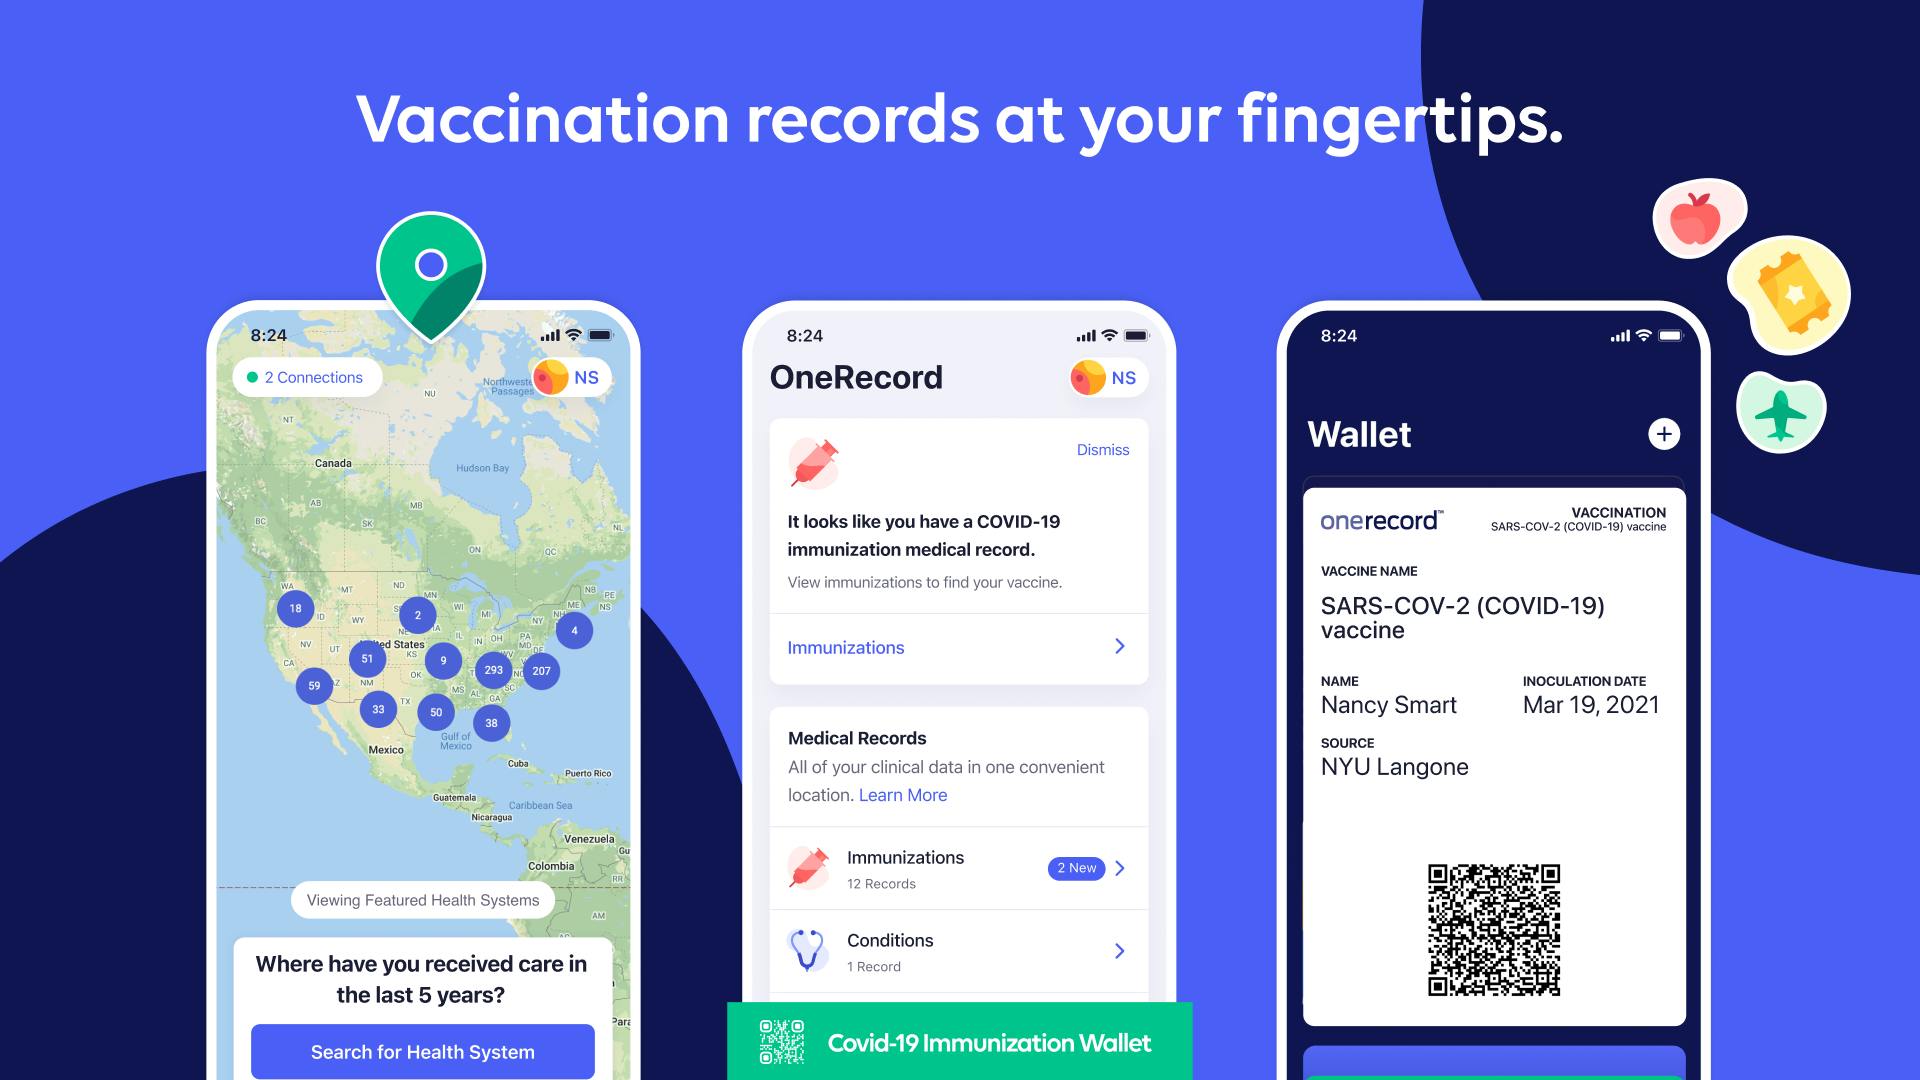 Vaccination records at your fingertips.